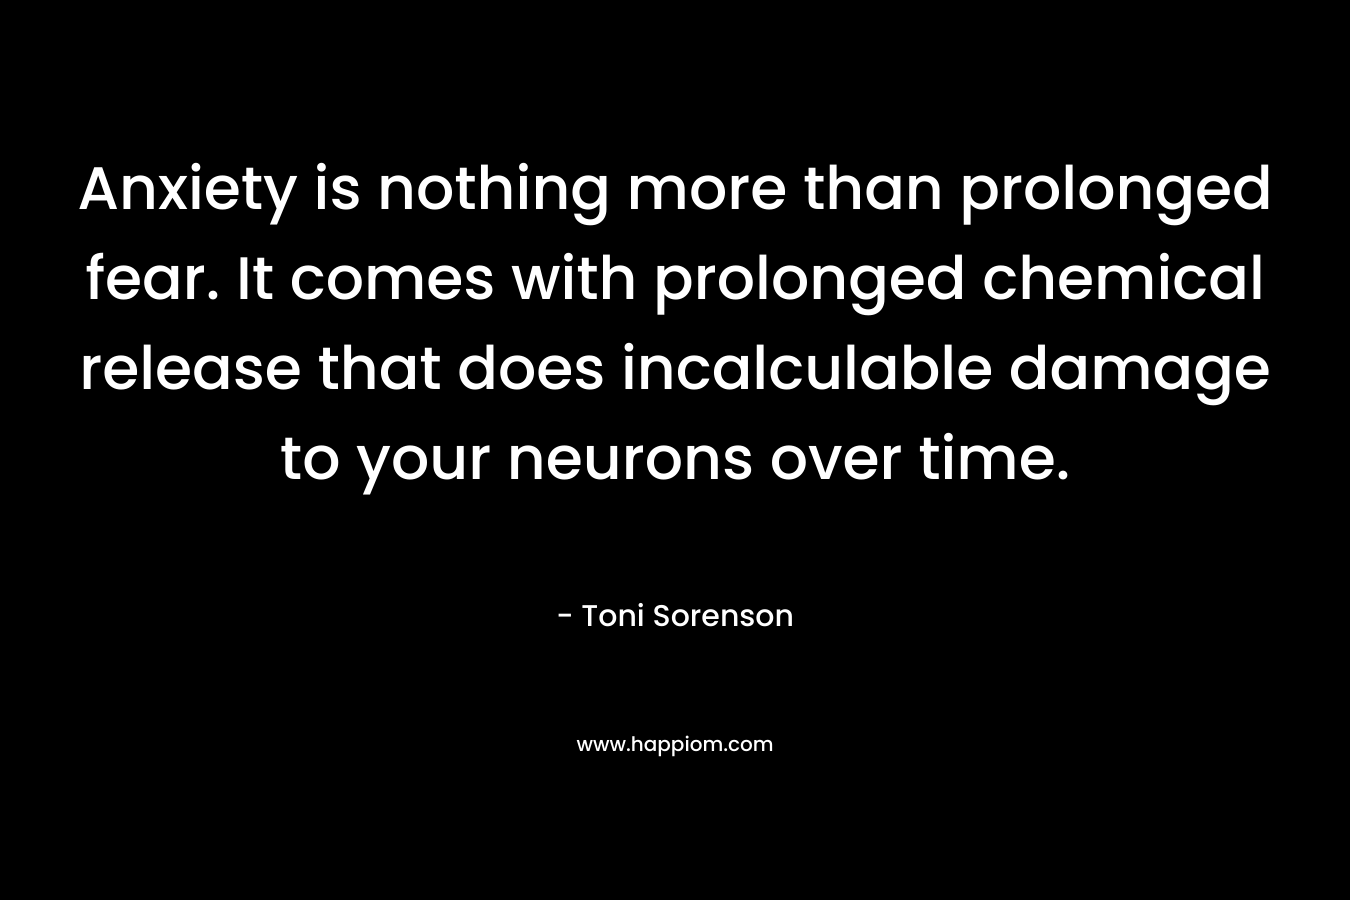 Anxiety is nothing more than prolonged fear. It comes with prolonged chemical release that does incalculable damage to your neurons over time. – Toni Sorenson